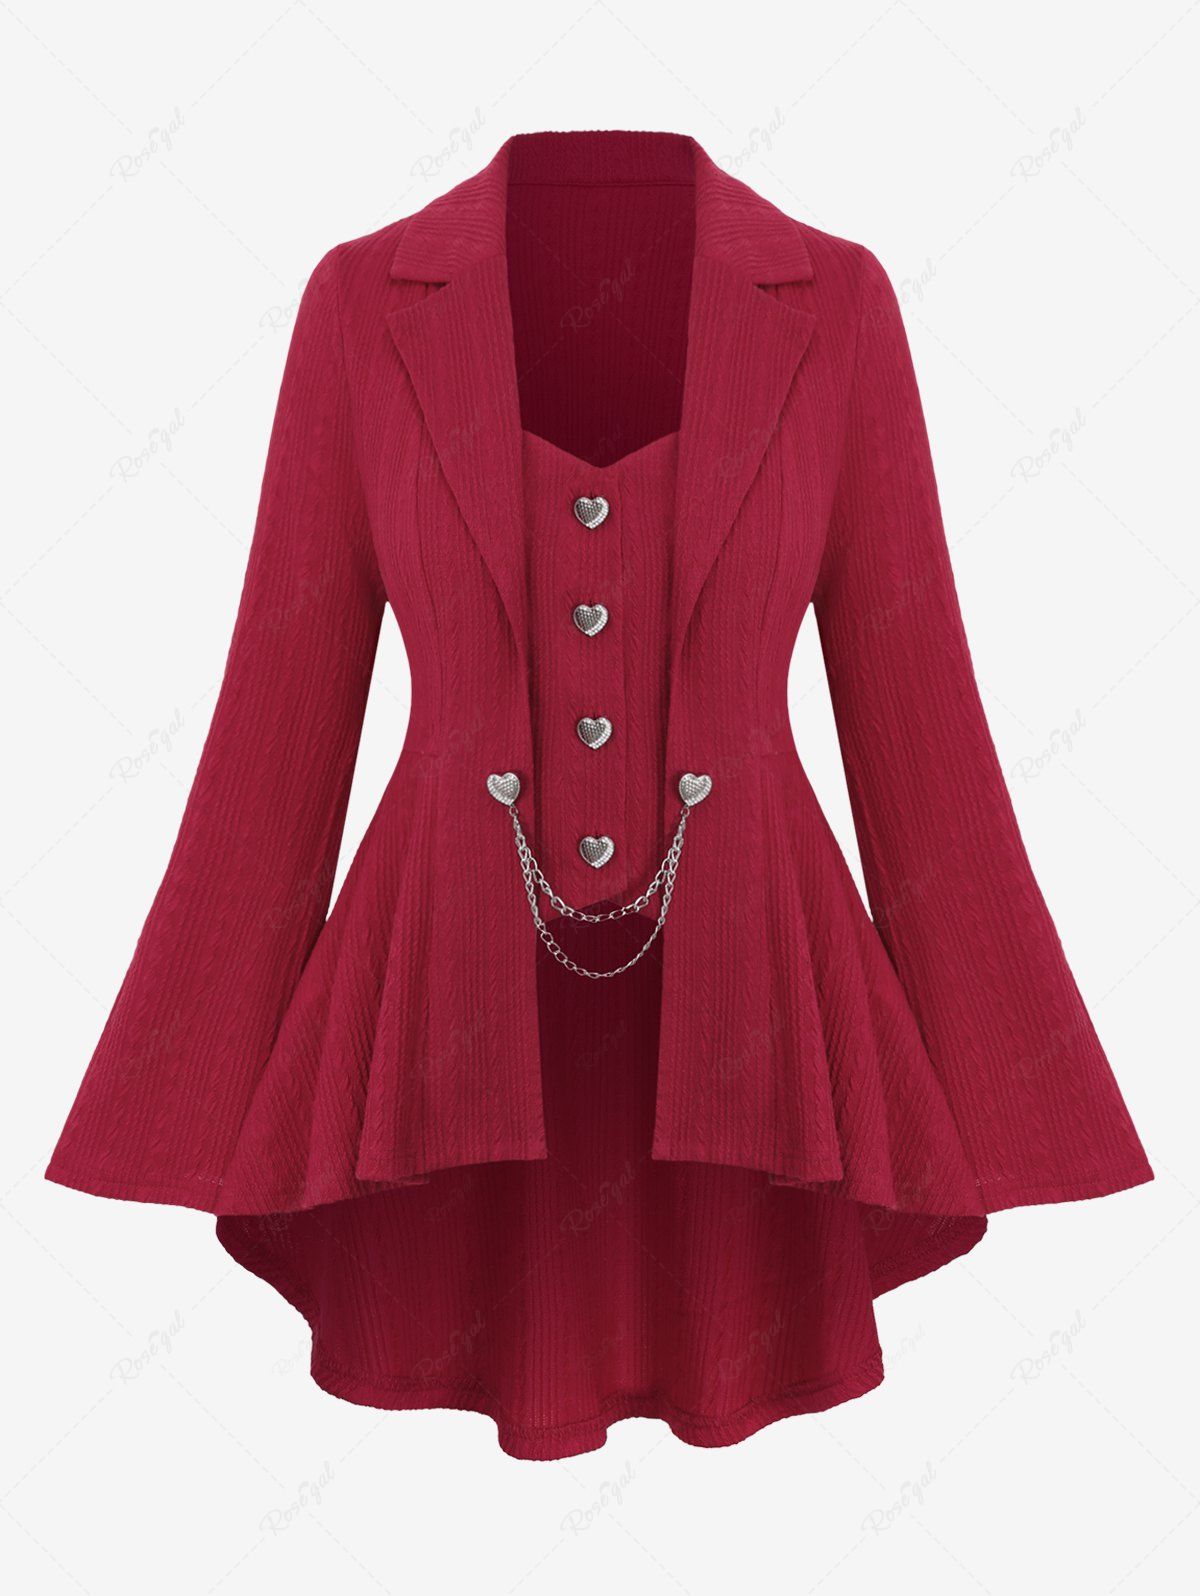 Discount Plus Size Heart Shaped Buttons Chains Panel High Low Textured Flare Sleeve 2 In 1 Blazer  